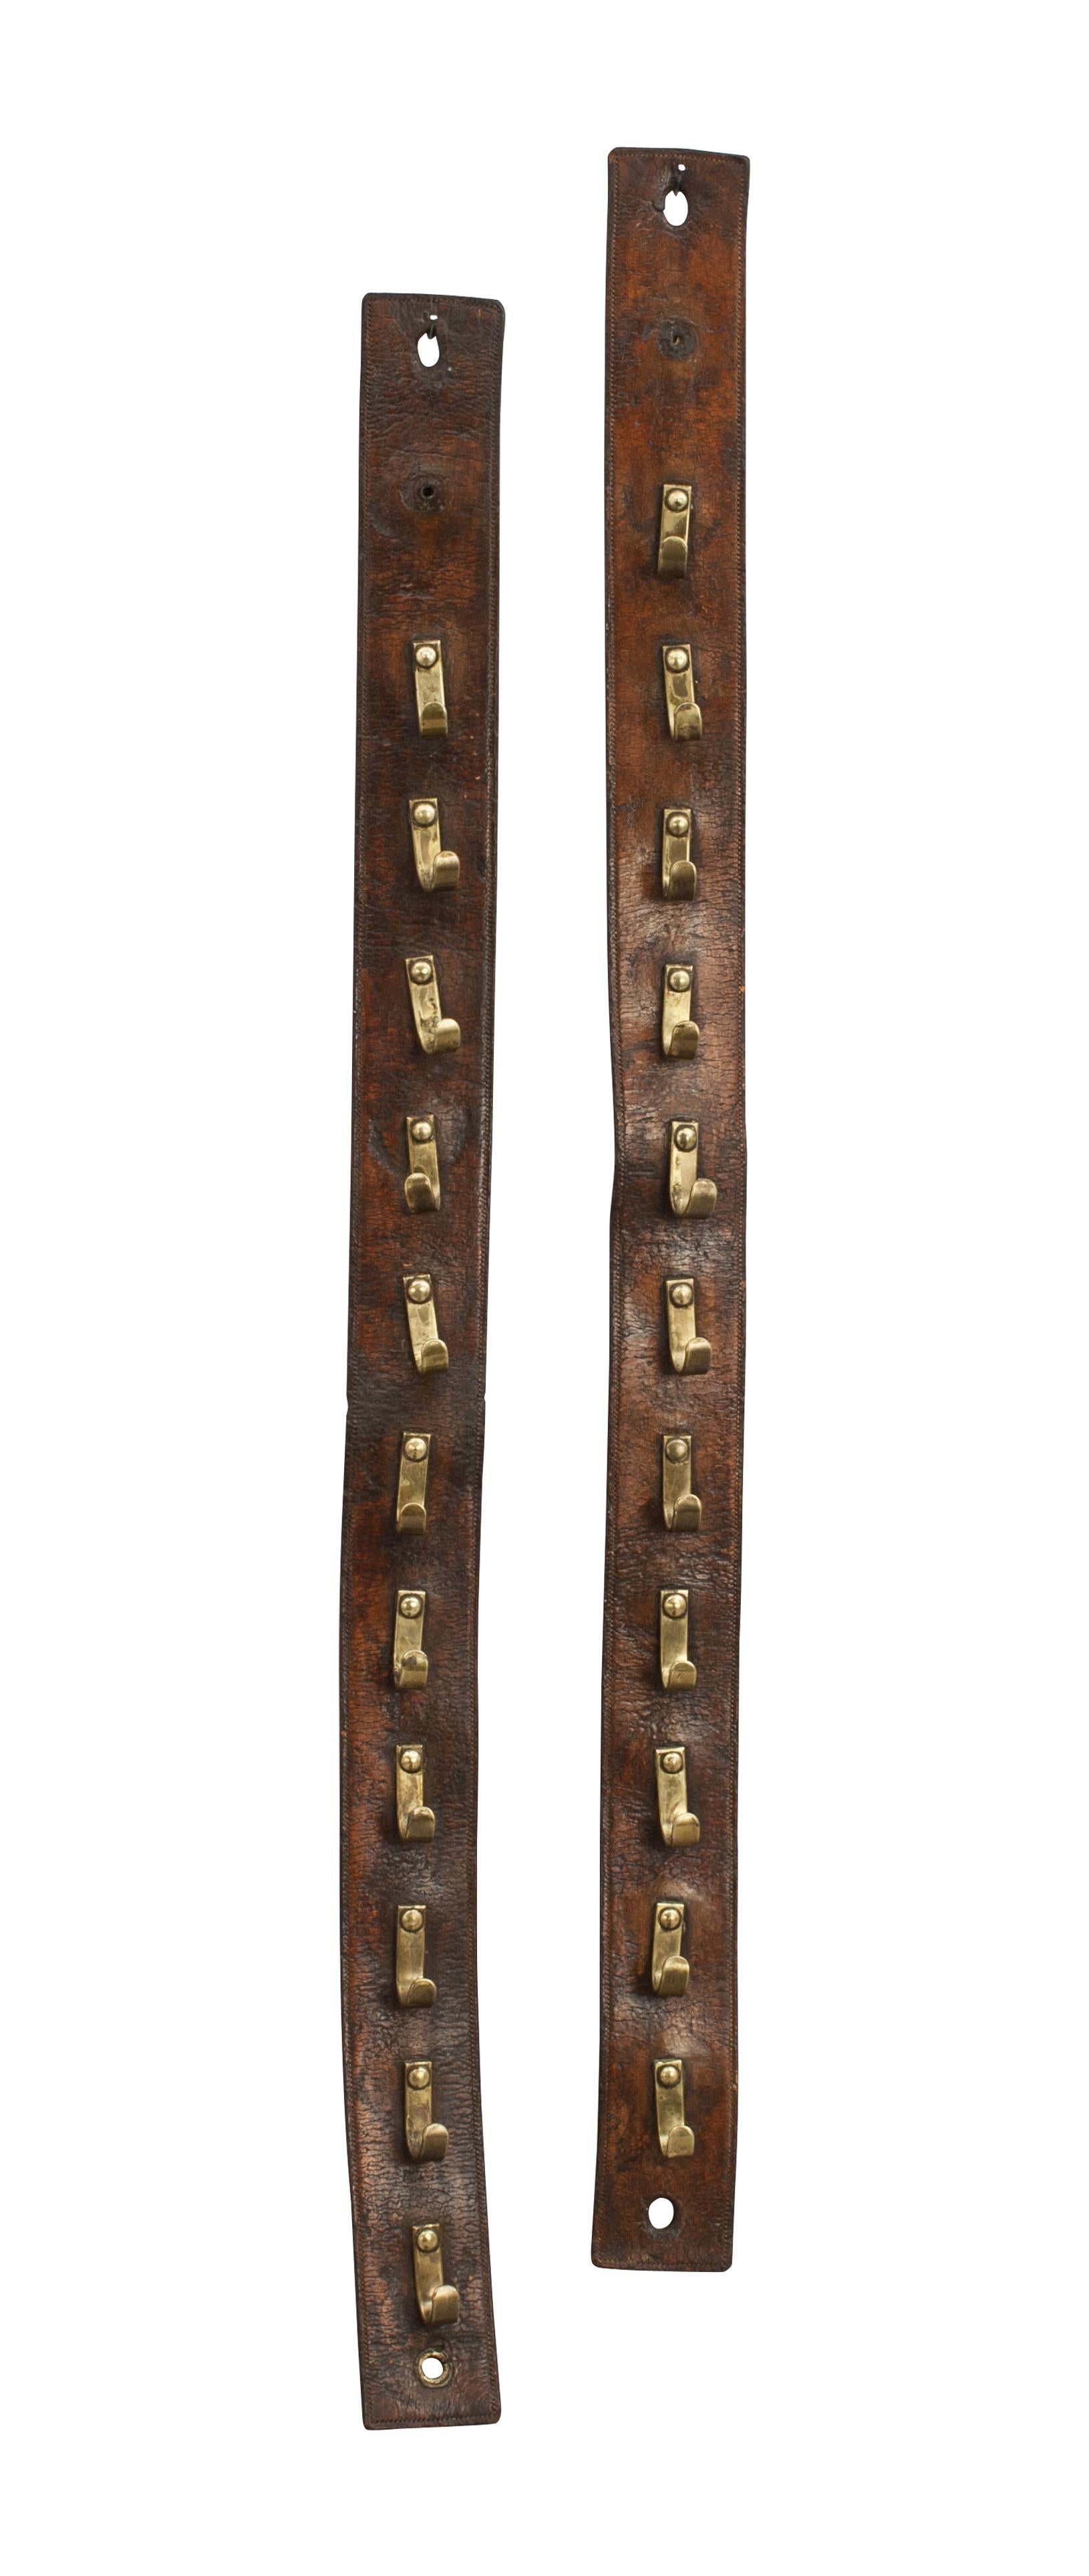 A good quality whip rack made of dark brown leather. There are 11 brass hooks on each strap. They are riveted to the leather strap with a second piece of leather sewn to the back to hide the back of the rivets. There are two hanging holes on each